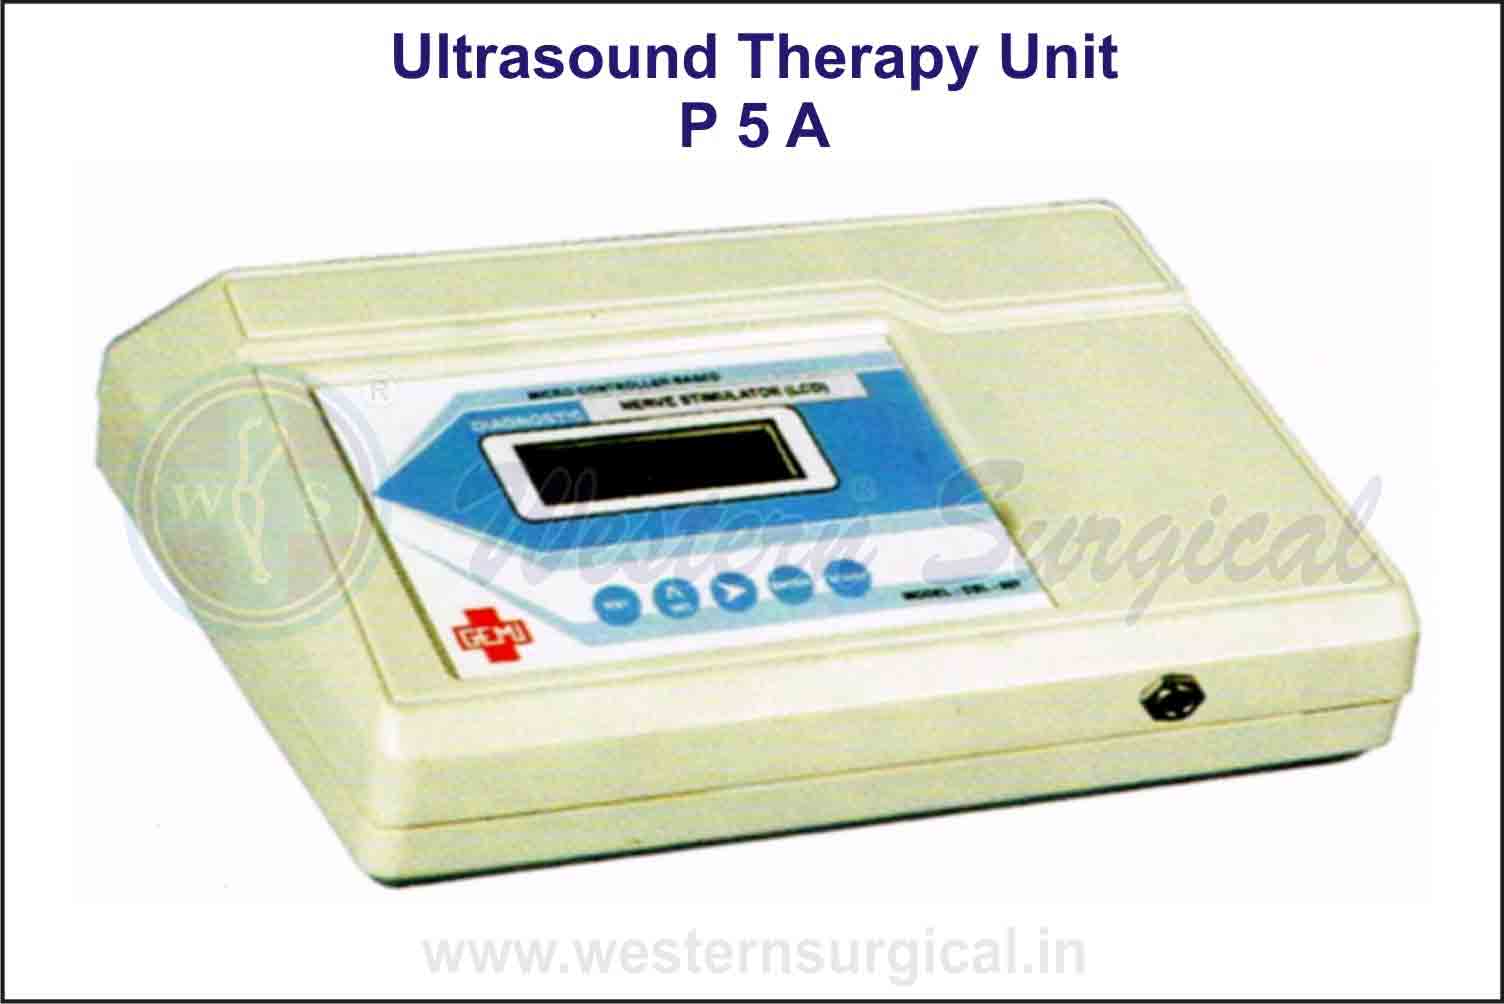 ULTRASOUND THERAPY